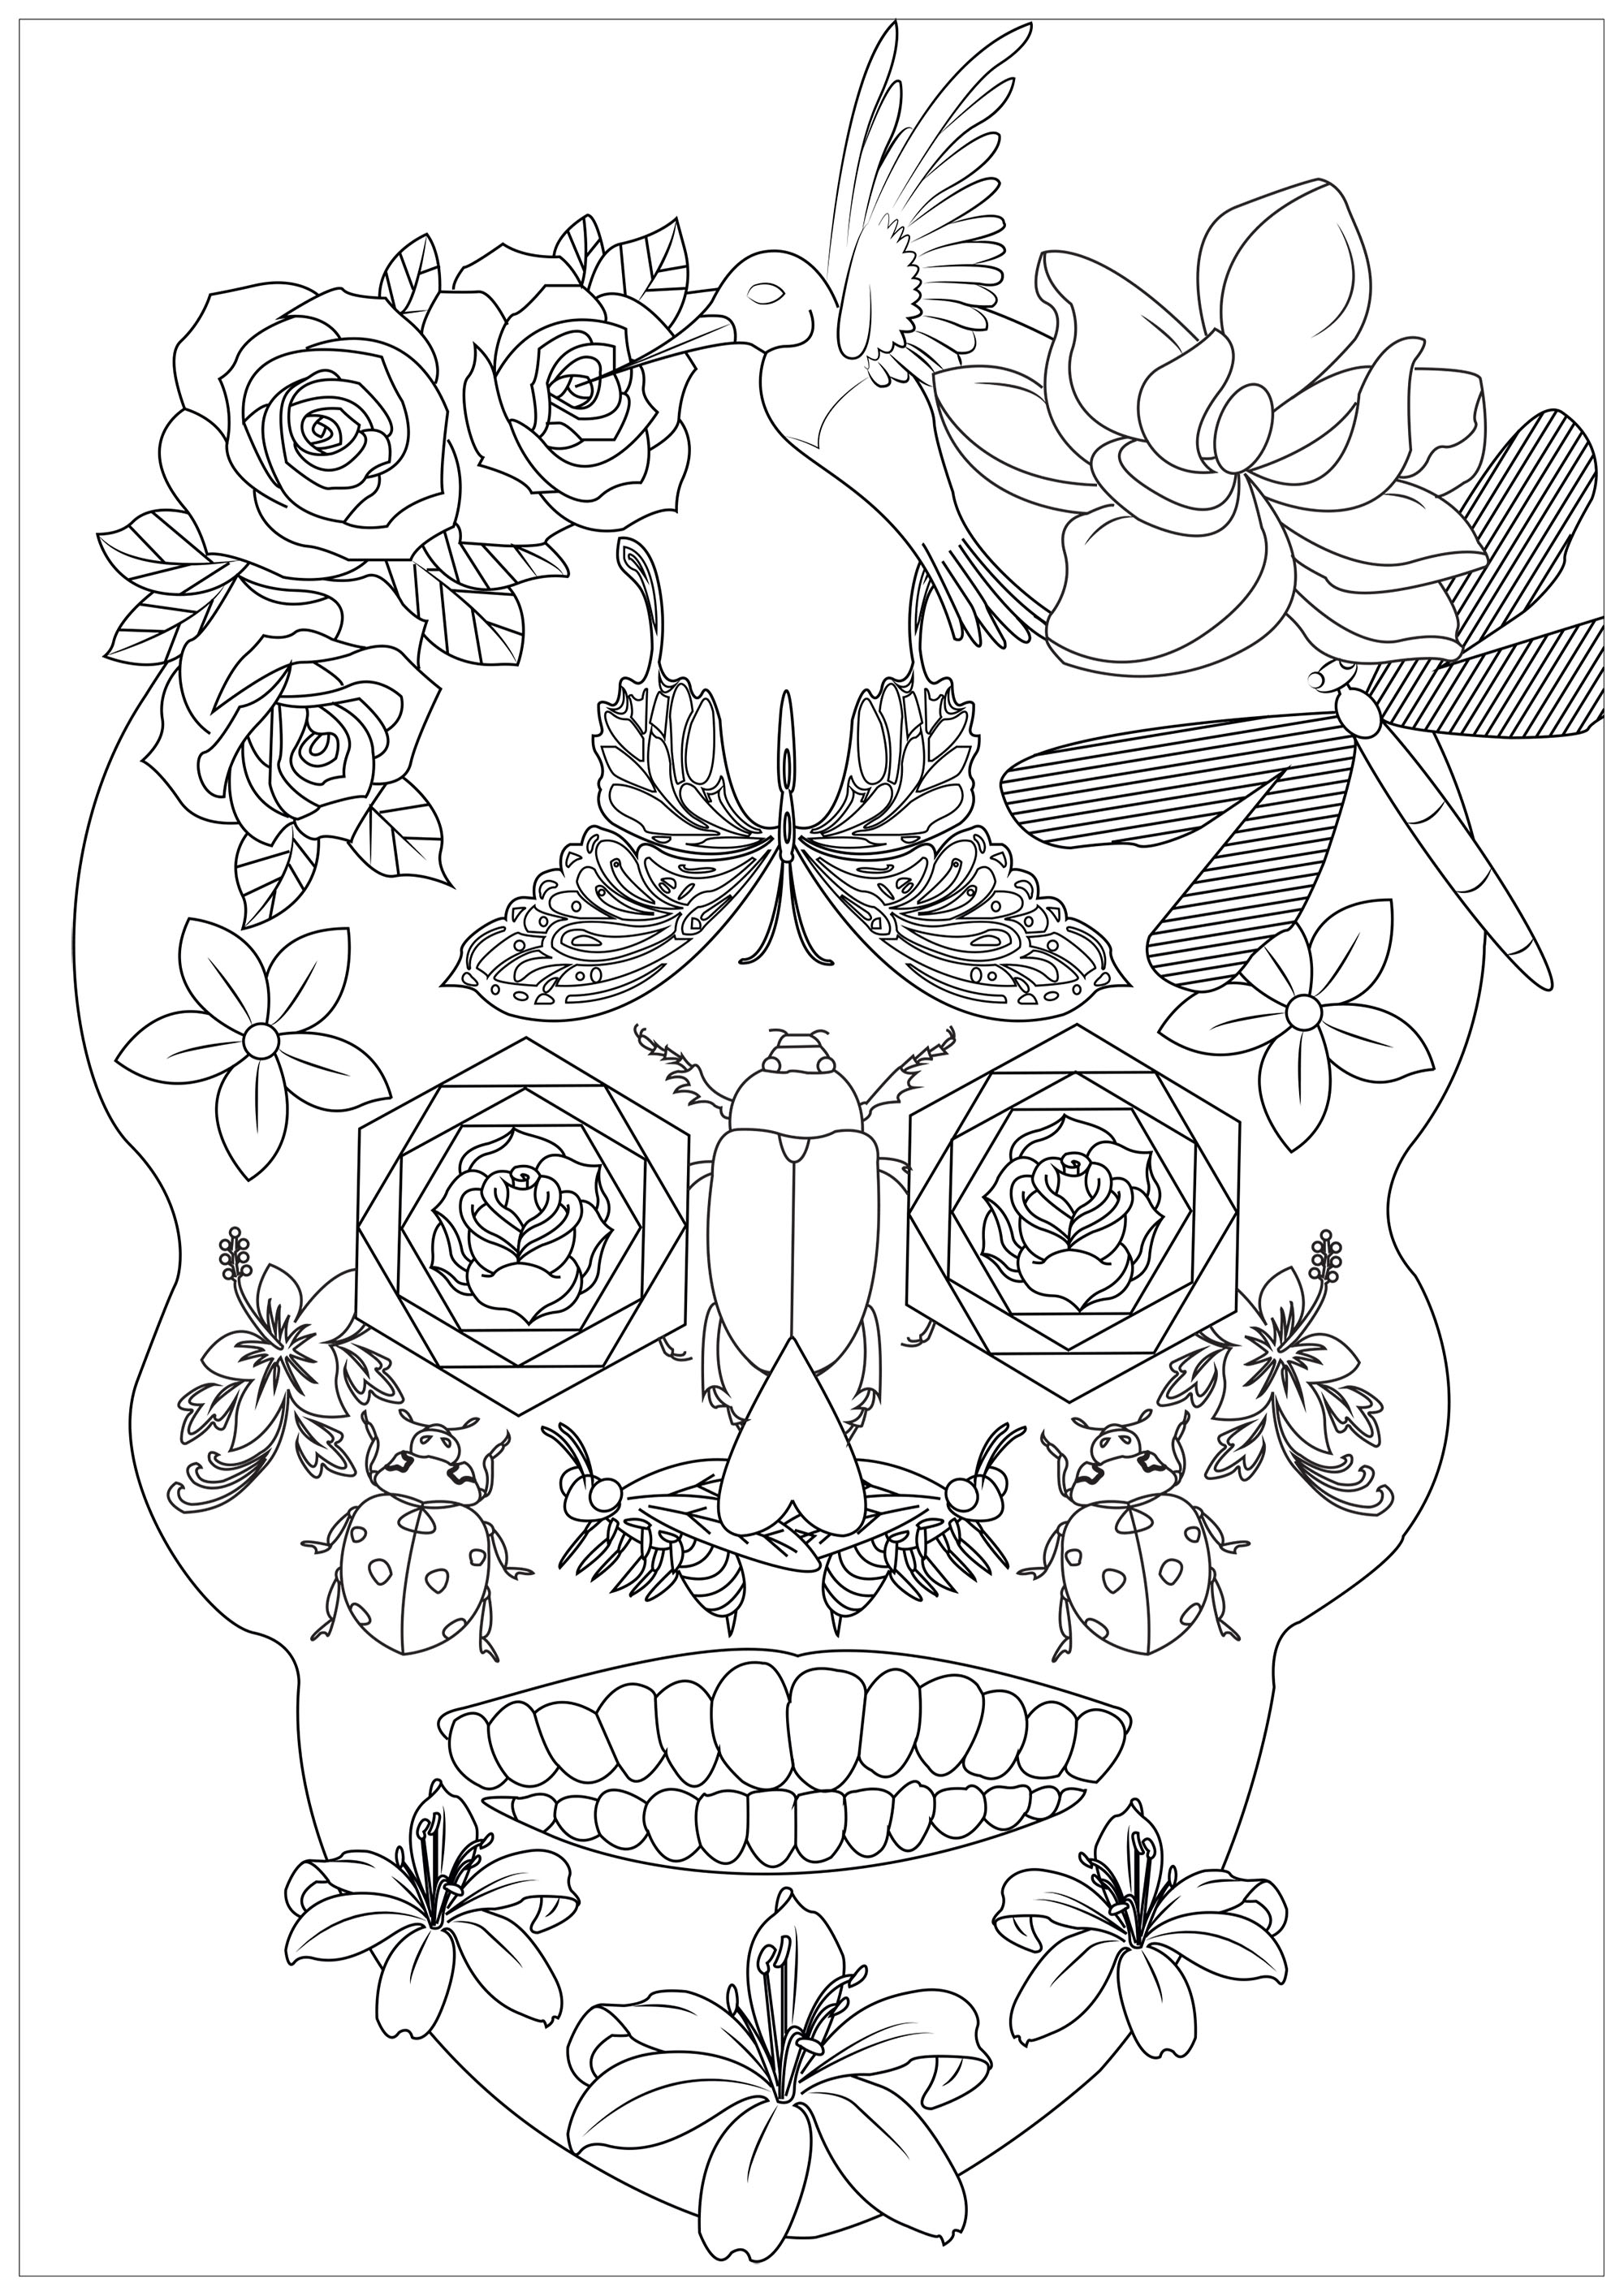 A skull full of insects, flowers and birds looking straight out of a peaceful meadow, Artist : Caillou